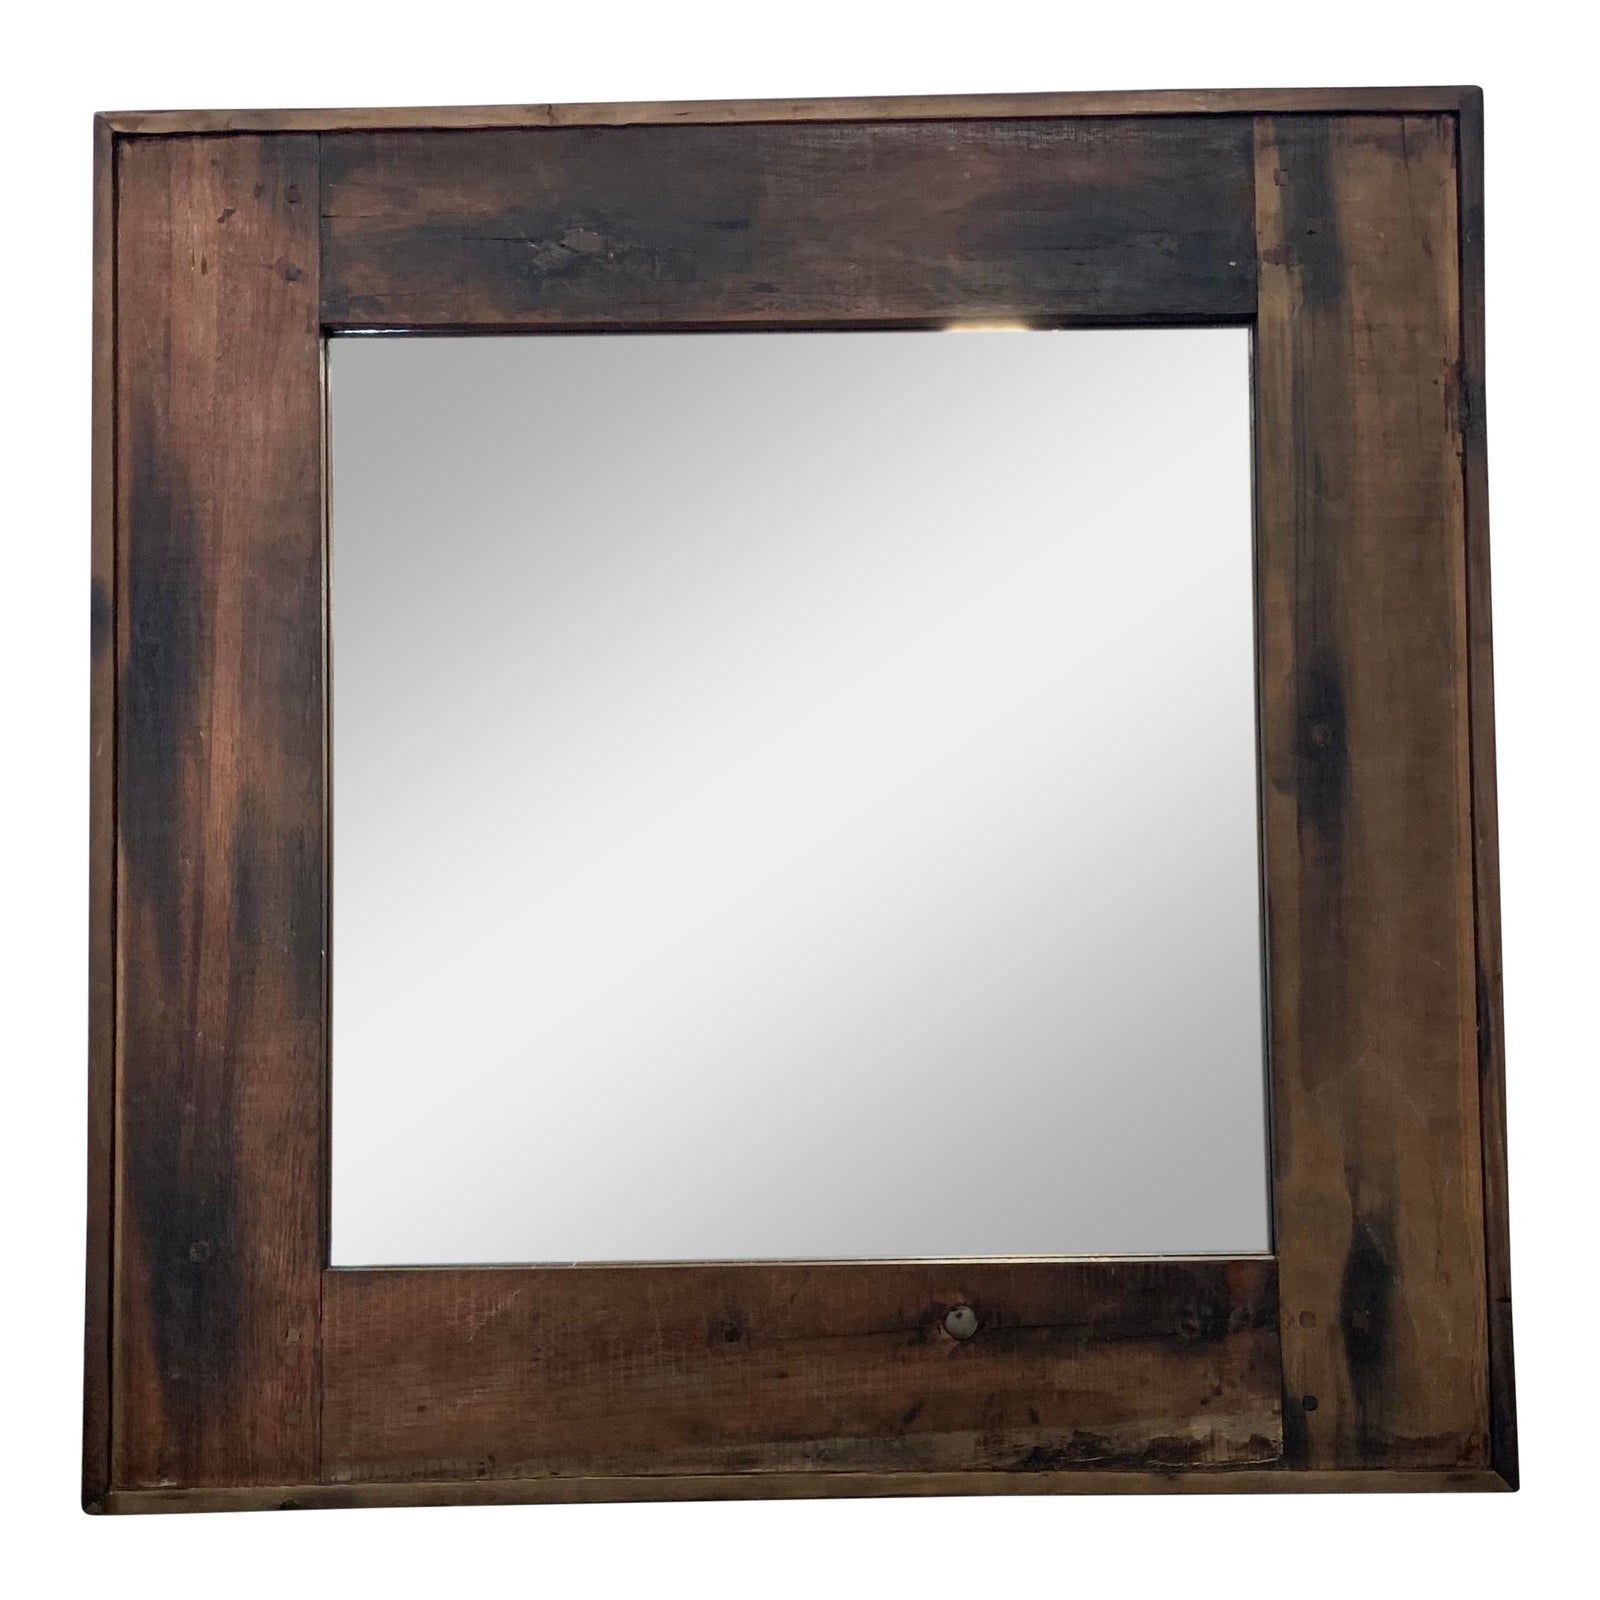 Rustic Style Reclaimed Salvaged Square Wood Mirror | Design Plus Gallery In Rustic Wood Wall Mirrors (View 8 of 15)